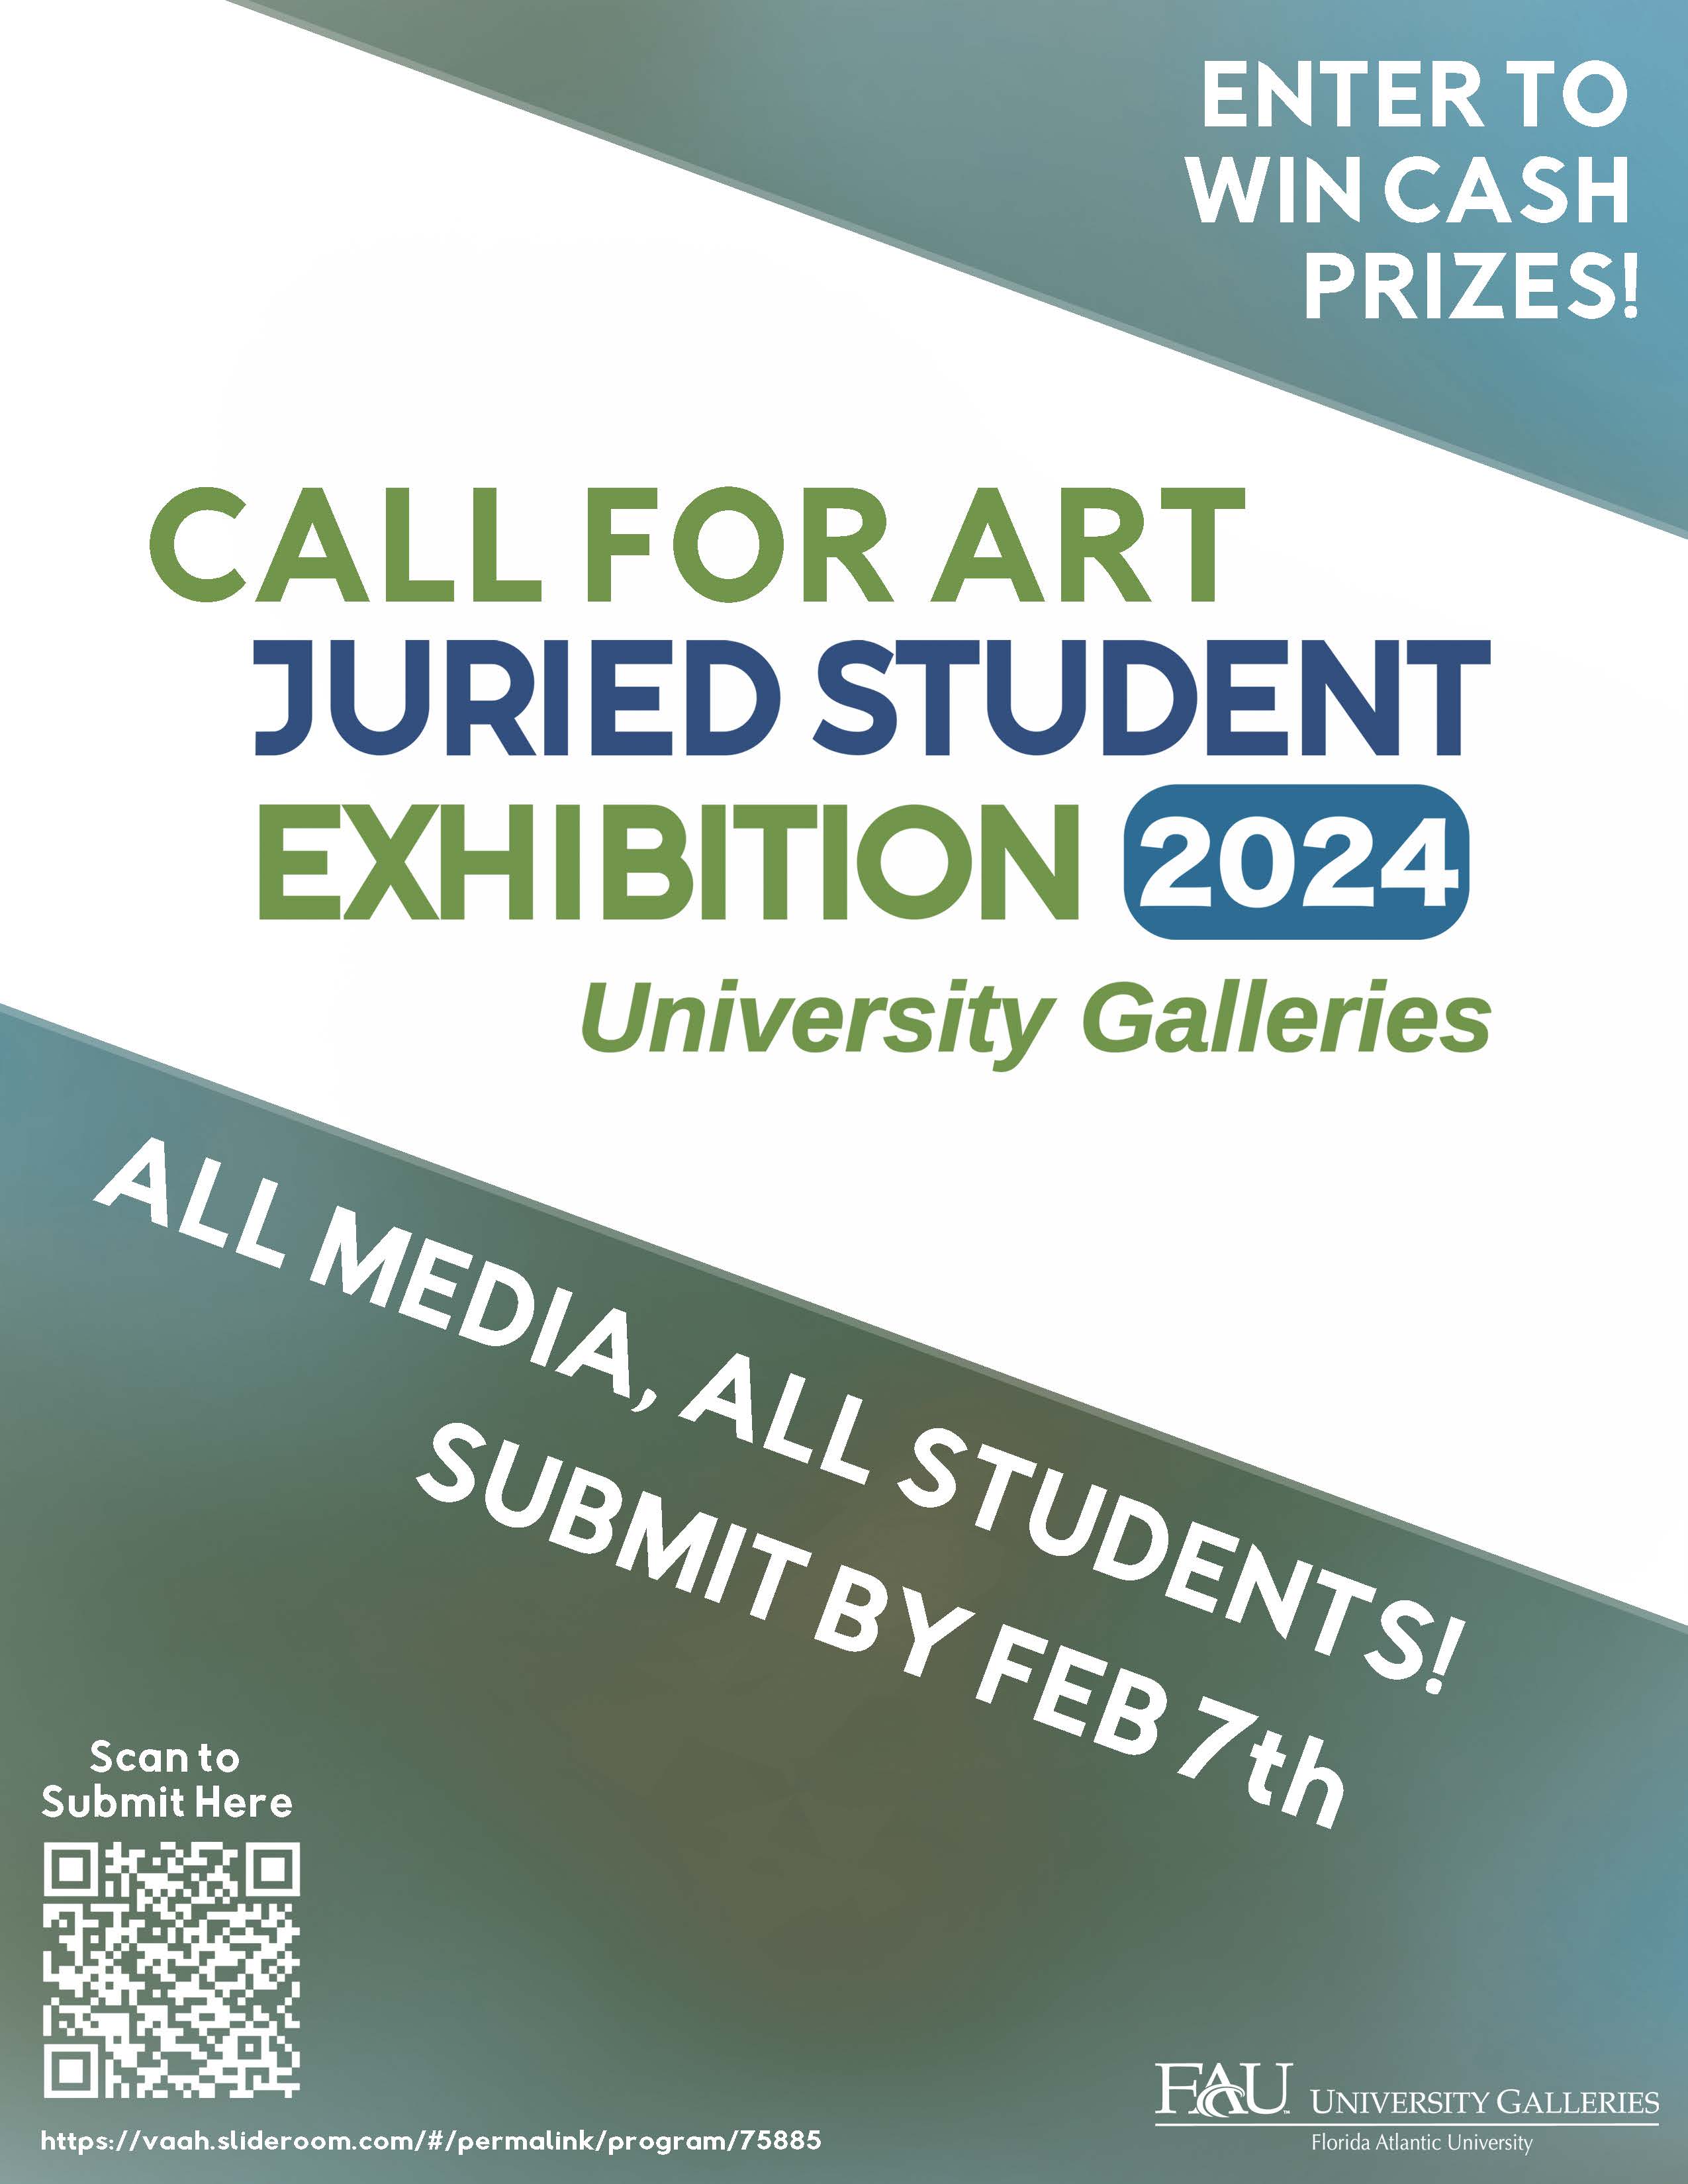 Juried Student Exhibition 